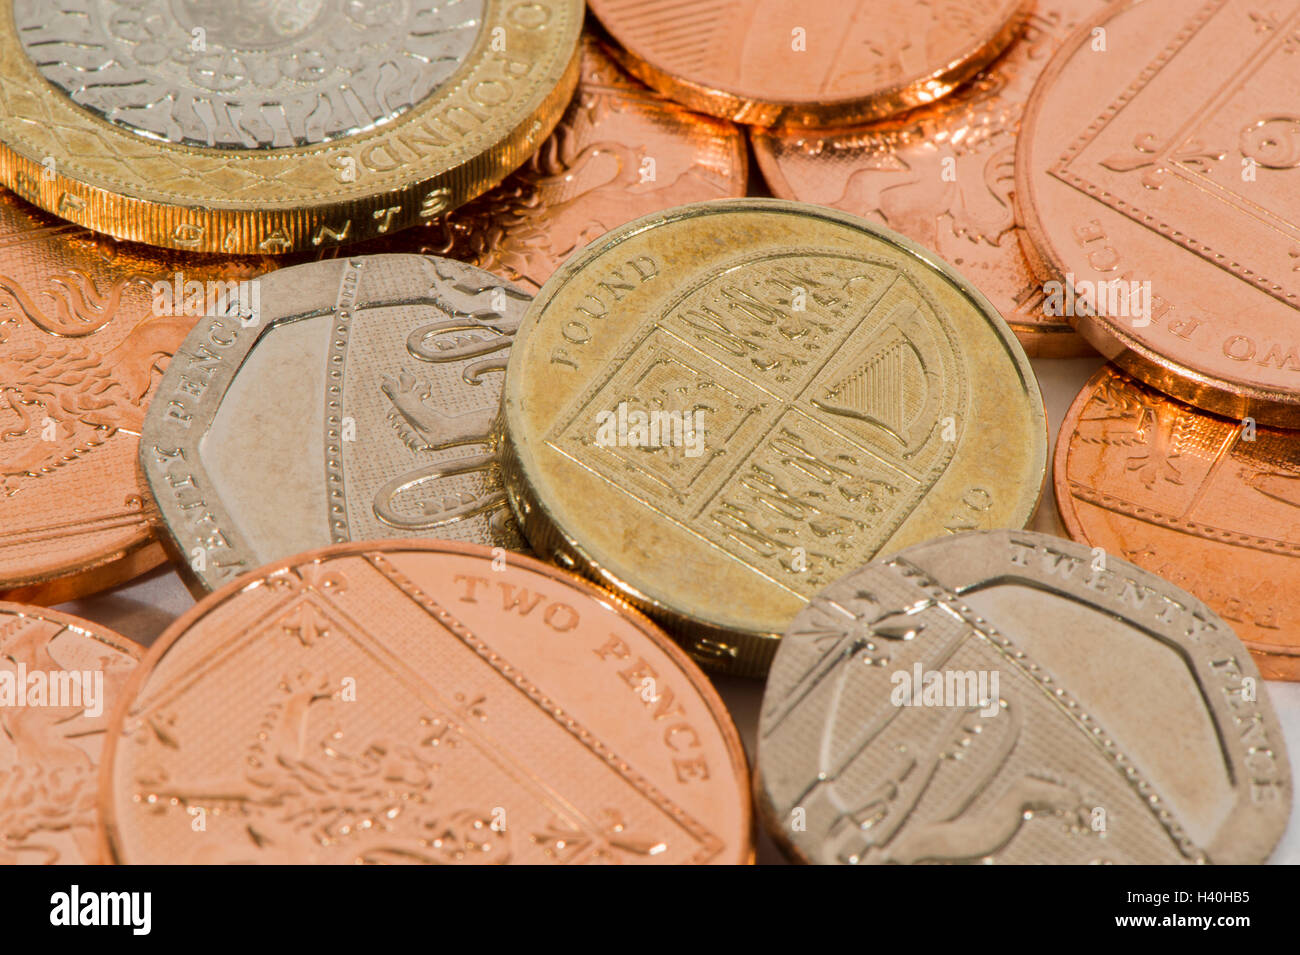 Close-up detail of money - current UK sterling coins in various denominations, both copper and silver - £2, £1, 20p, 2p. Stock Photo